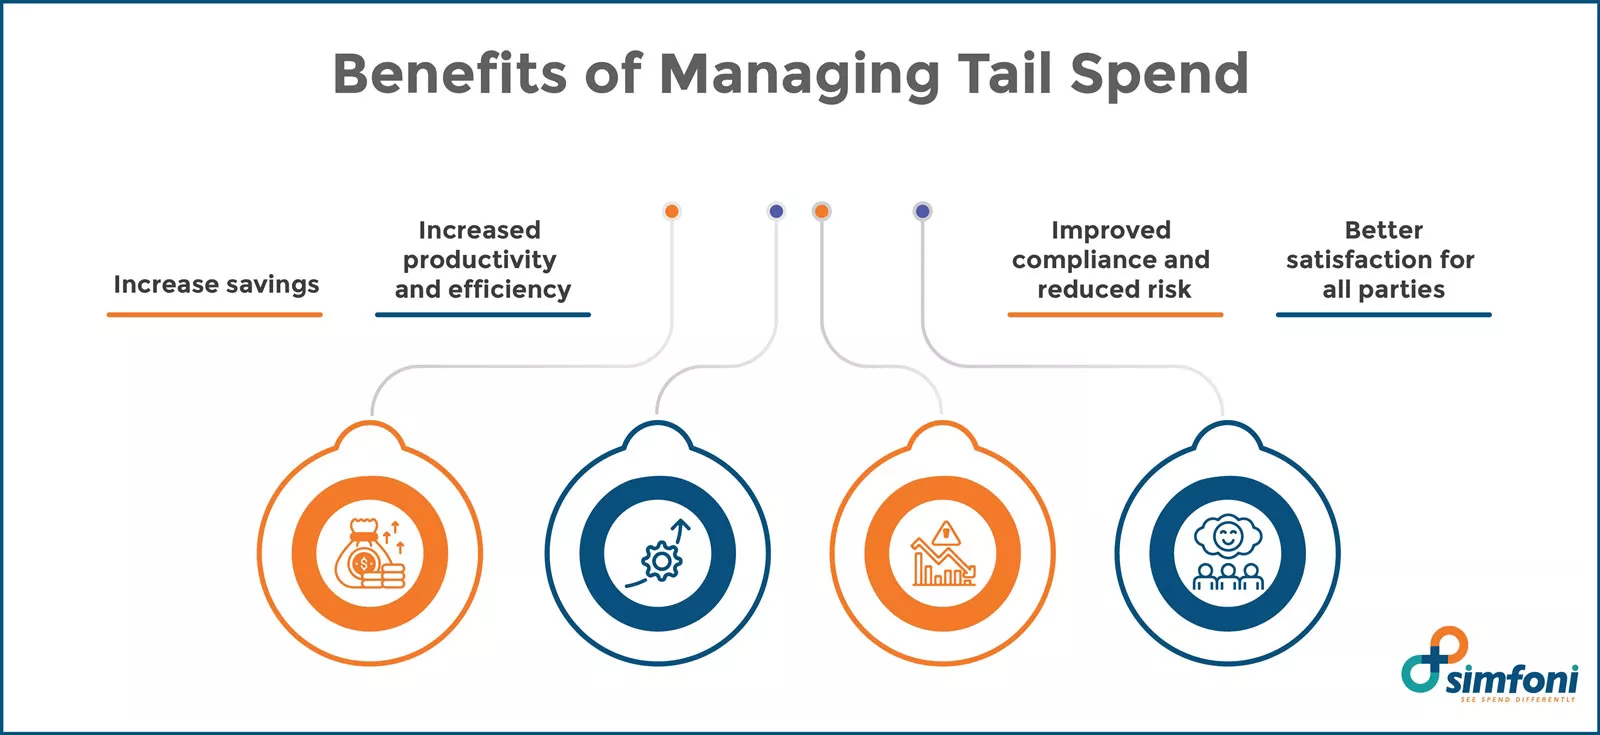 Benefits of Managing Tail Spend